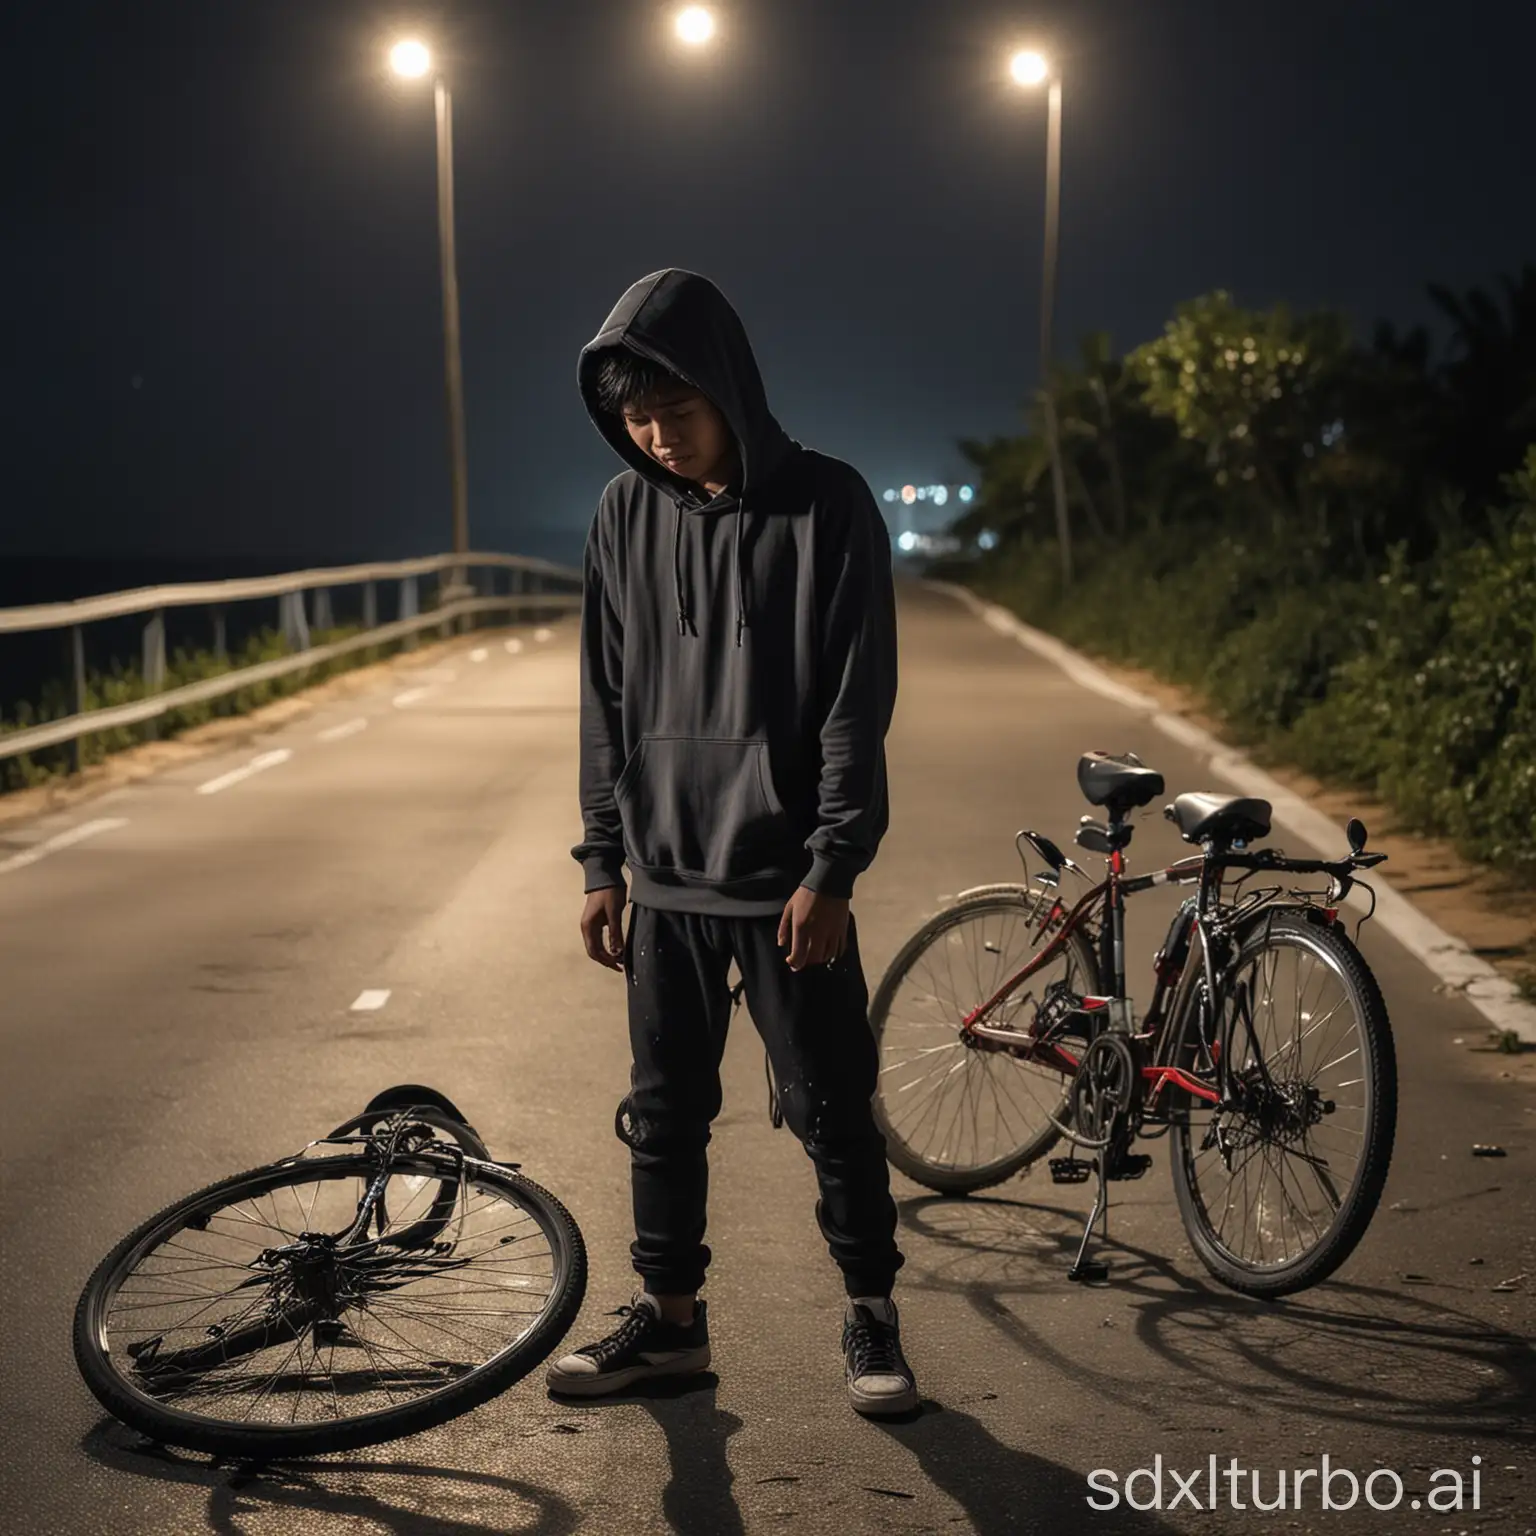 Malay teenager boy wearing hoodie and long pants, crying on the road after having a small accident with his bicycle, the background is a road and a beach at night